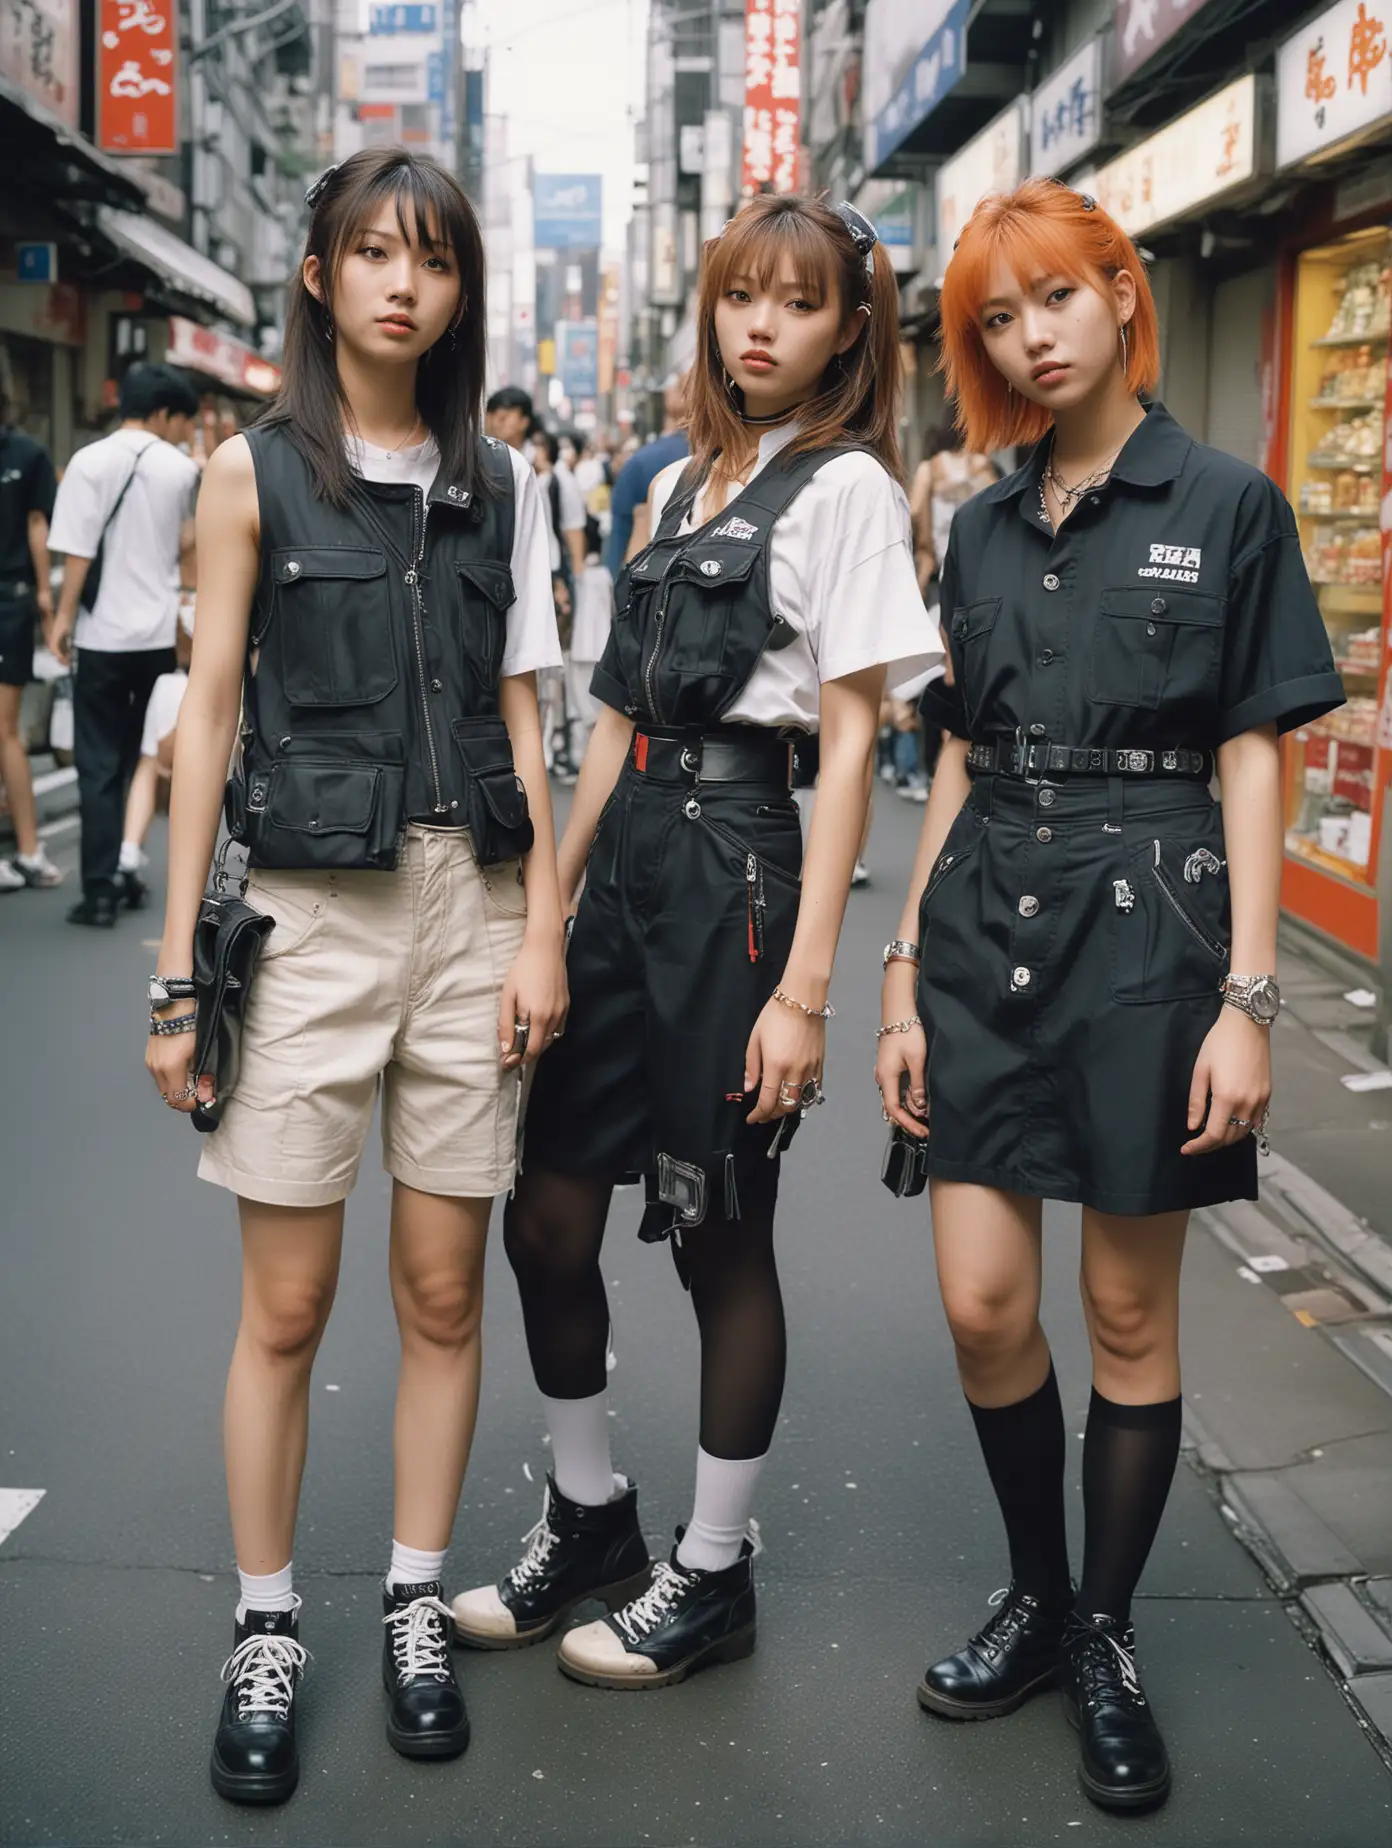 real photos of Japanese teenagers showing their  street fashions in Shinjuku circa year 2000, exaggerated sensual fashion based on punk mechanic, in the style of Shoichi Aoki photos for “Fruits” magazine